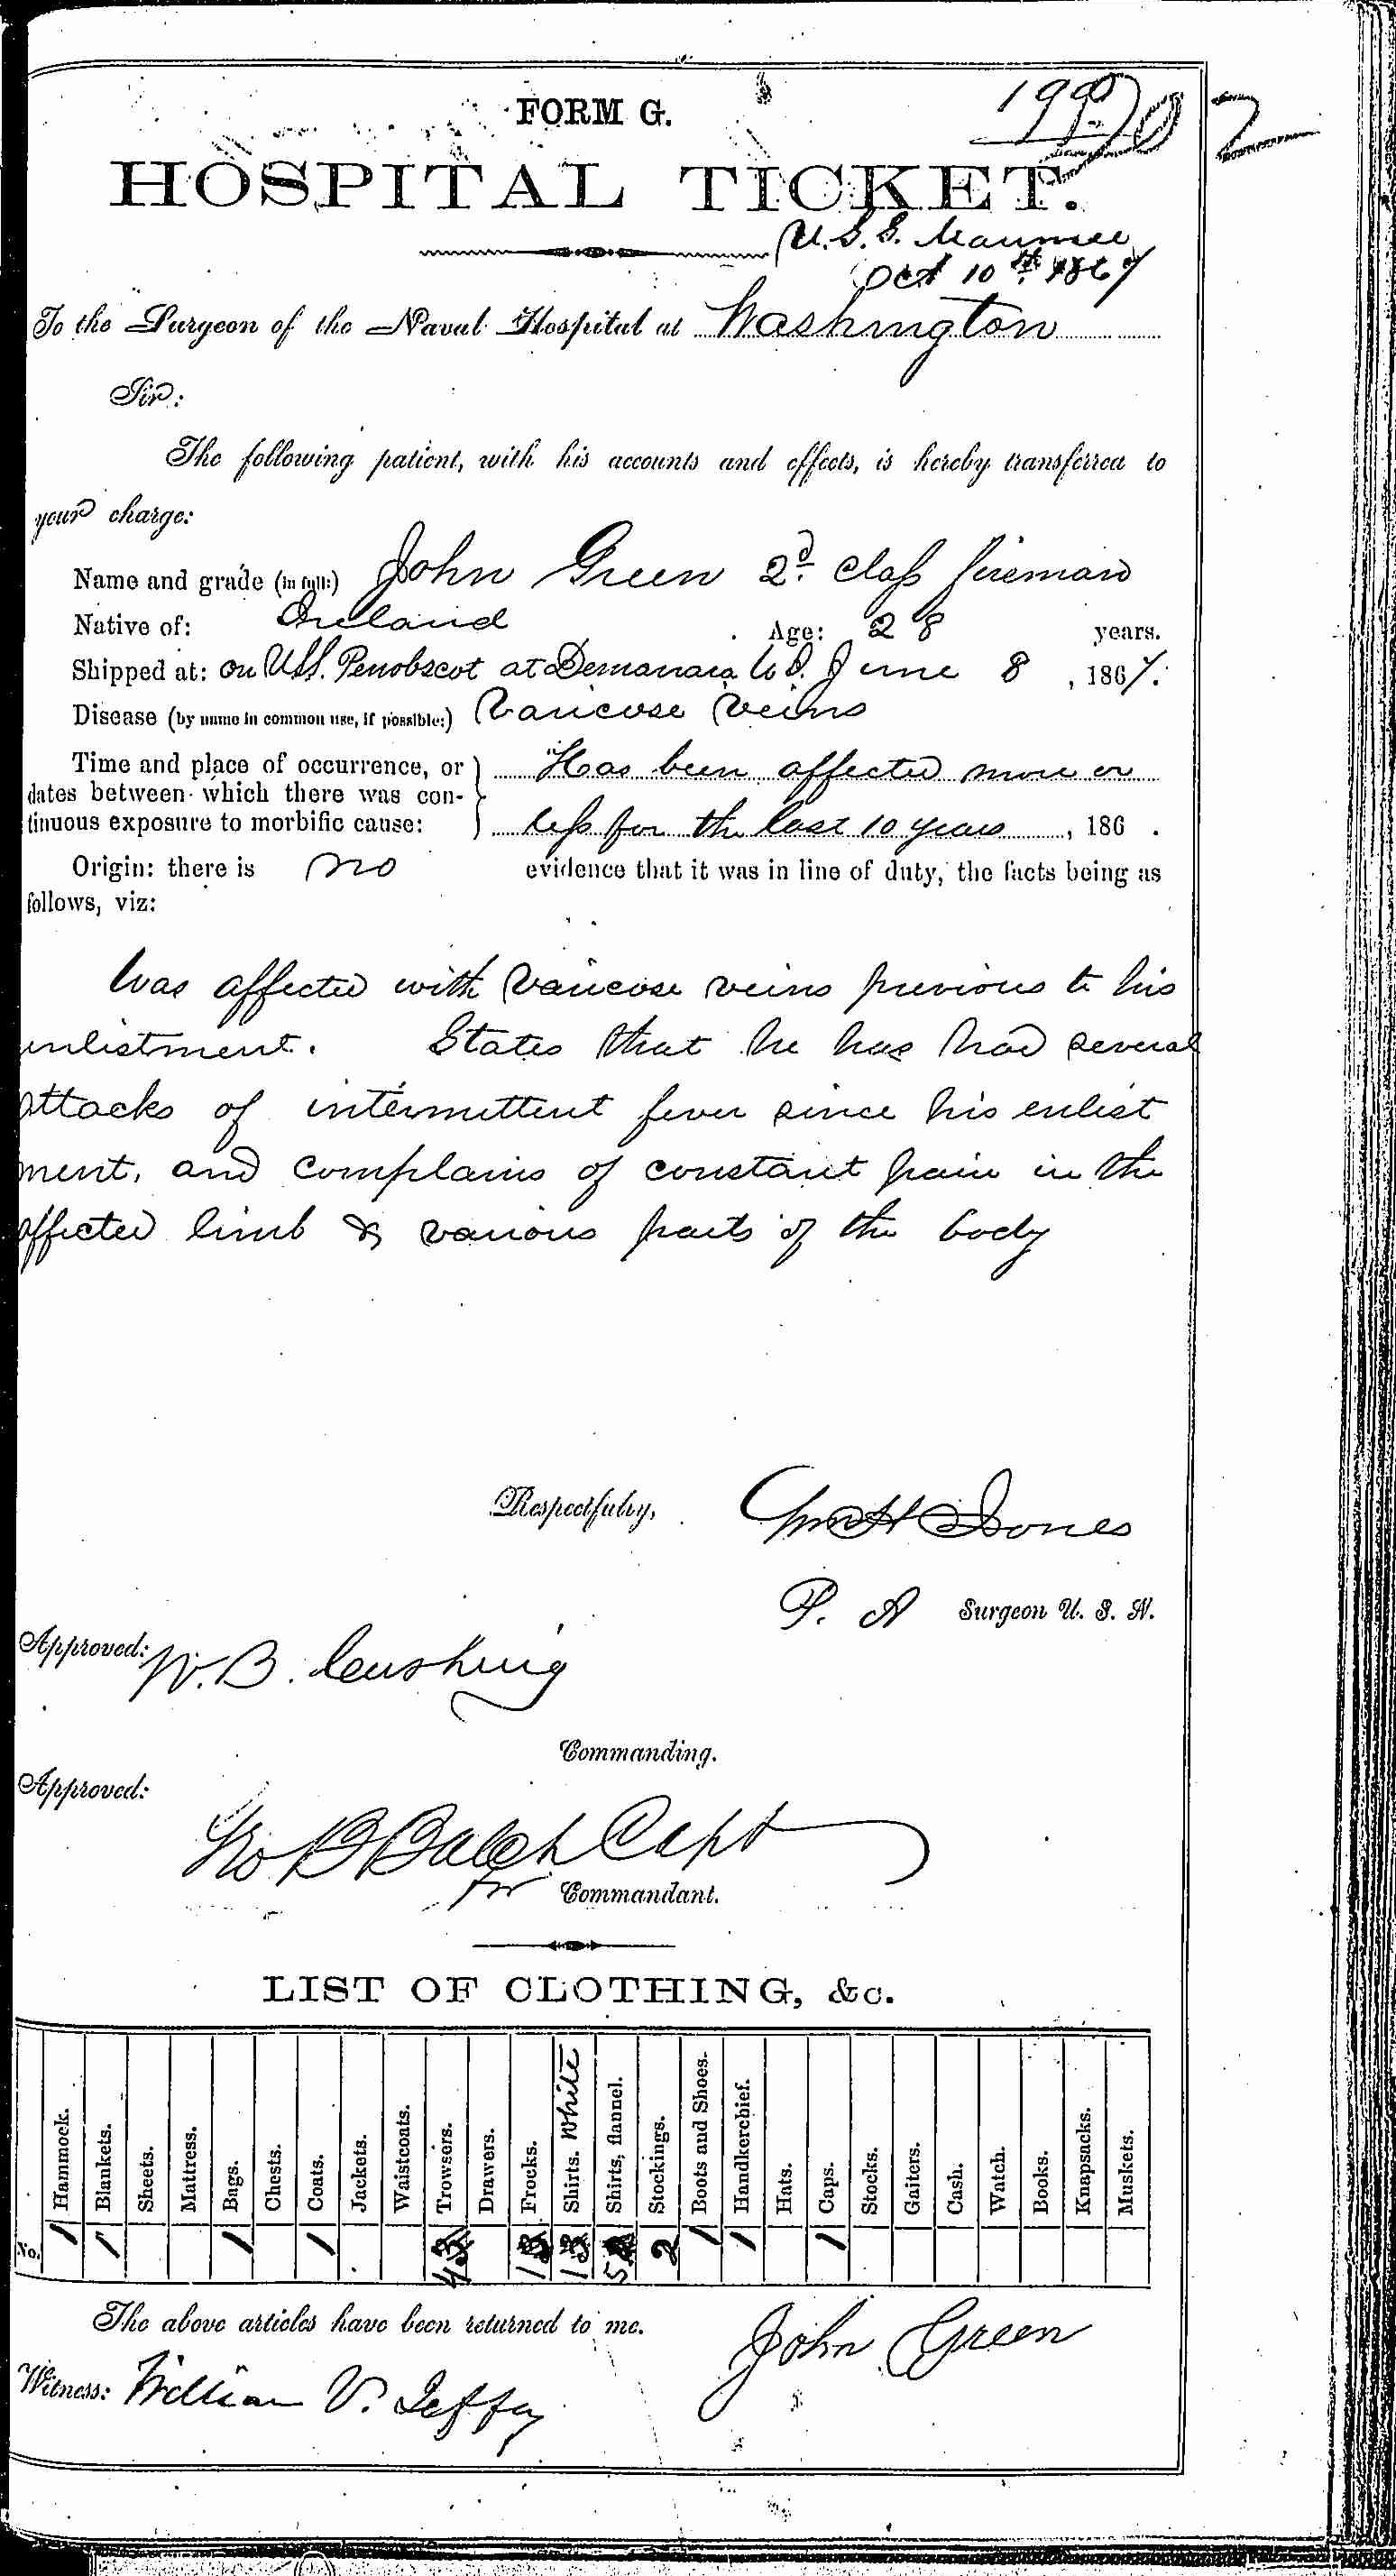 Entry for John Green (page 1 of 2) in the log Hospital Tickets and Case Papers - Naval Hospital - Washington, D.C. - 1866-68